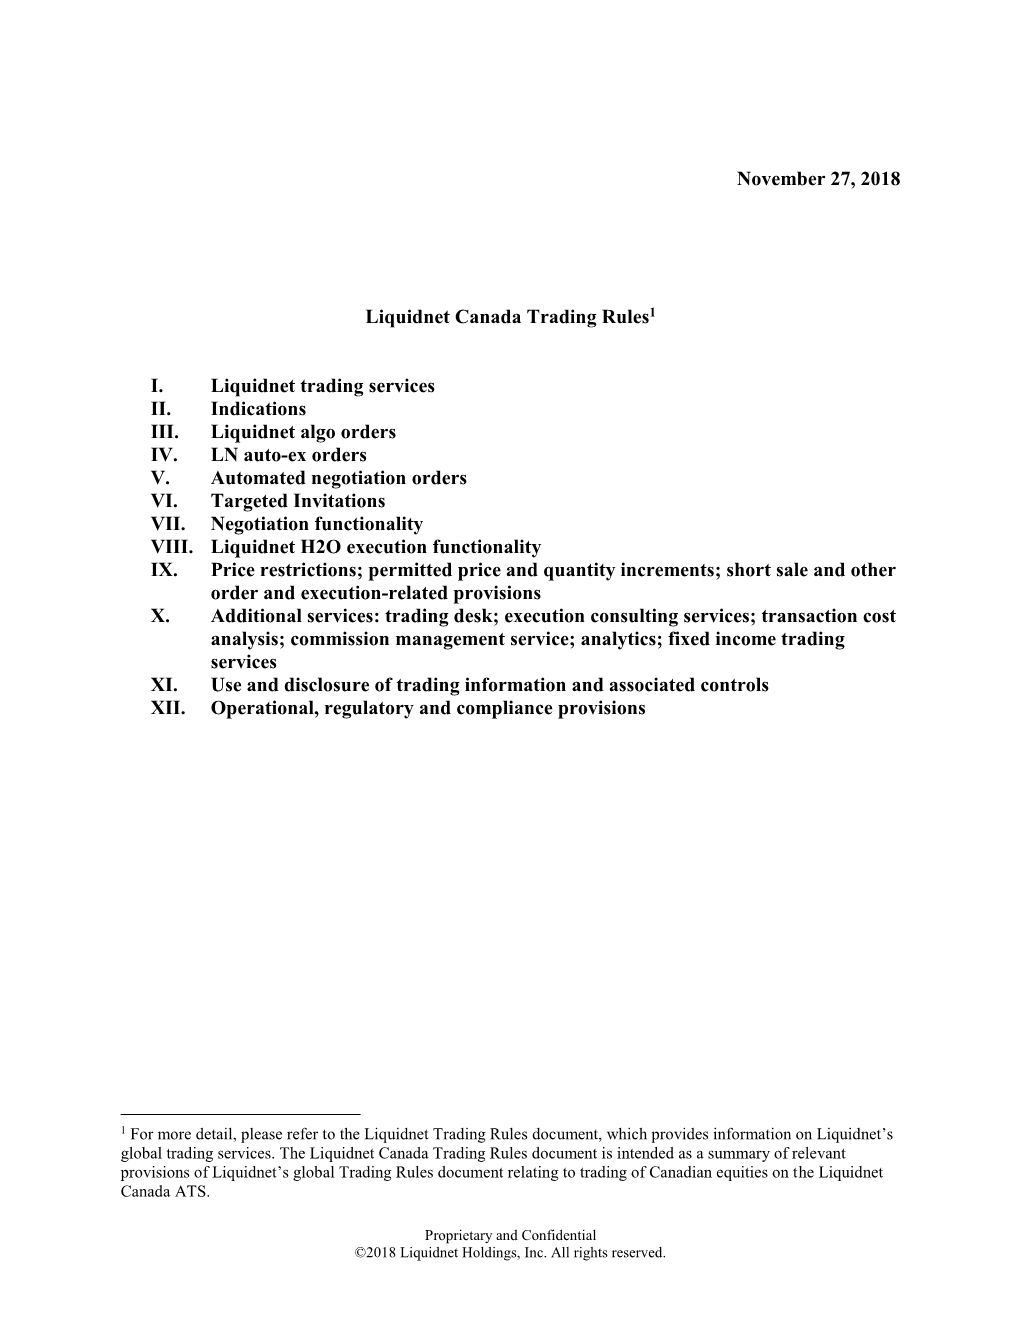 Liquidnet Trading Rules Document, Which Provides Information on Liquidnet’S Global Trading Services